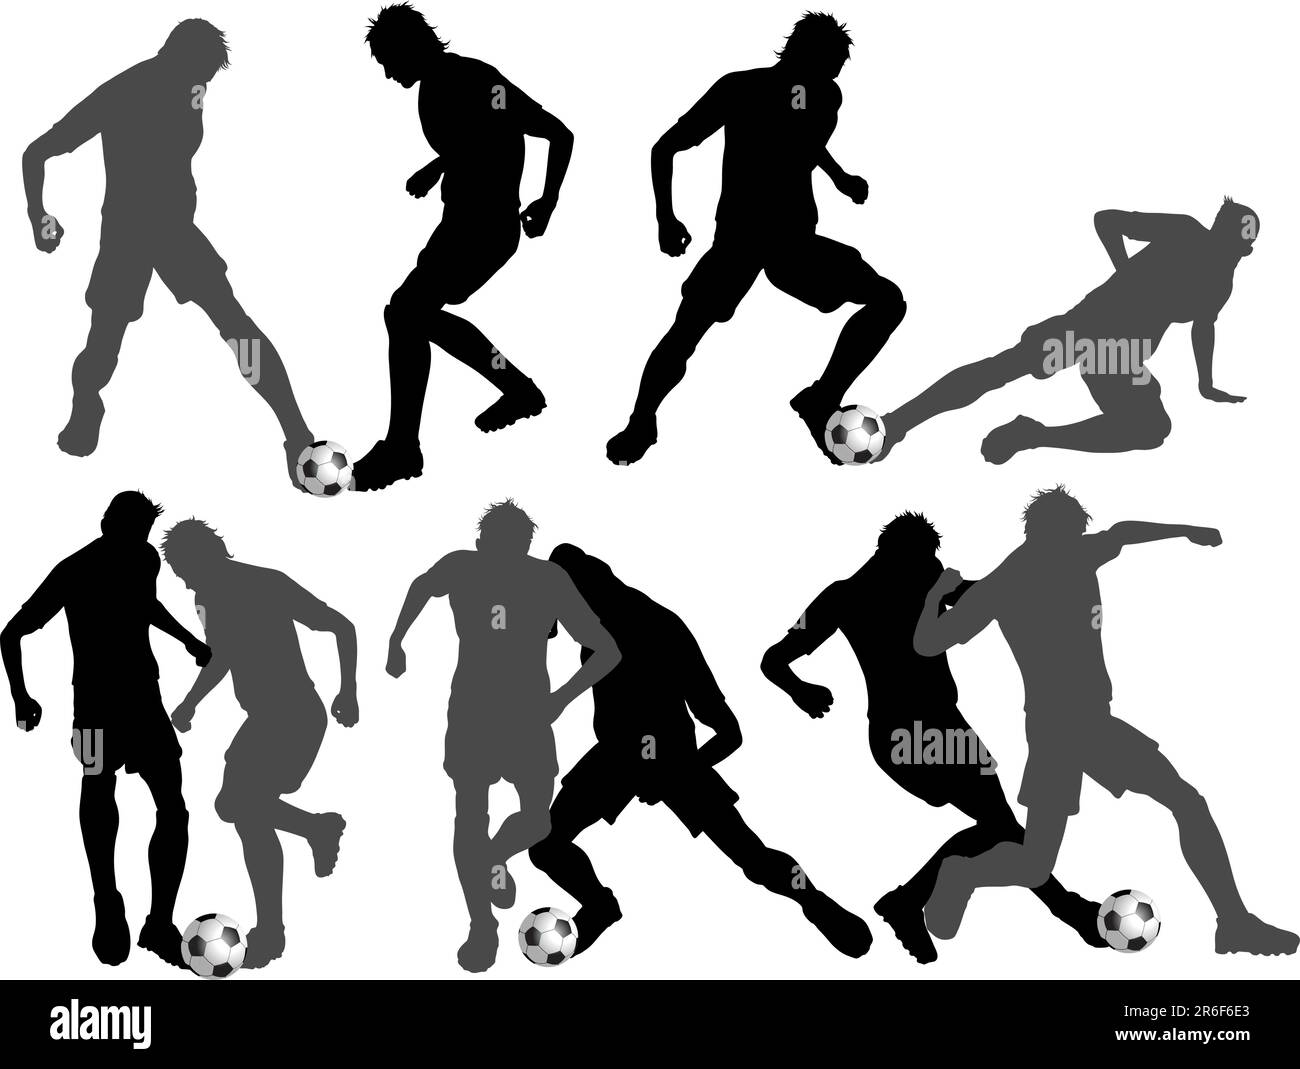 Athletic tackle Stock Vector Images - Alamy